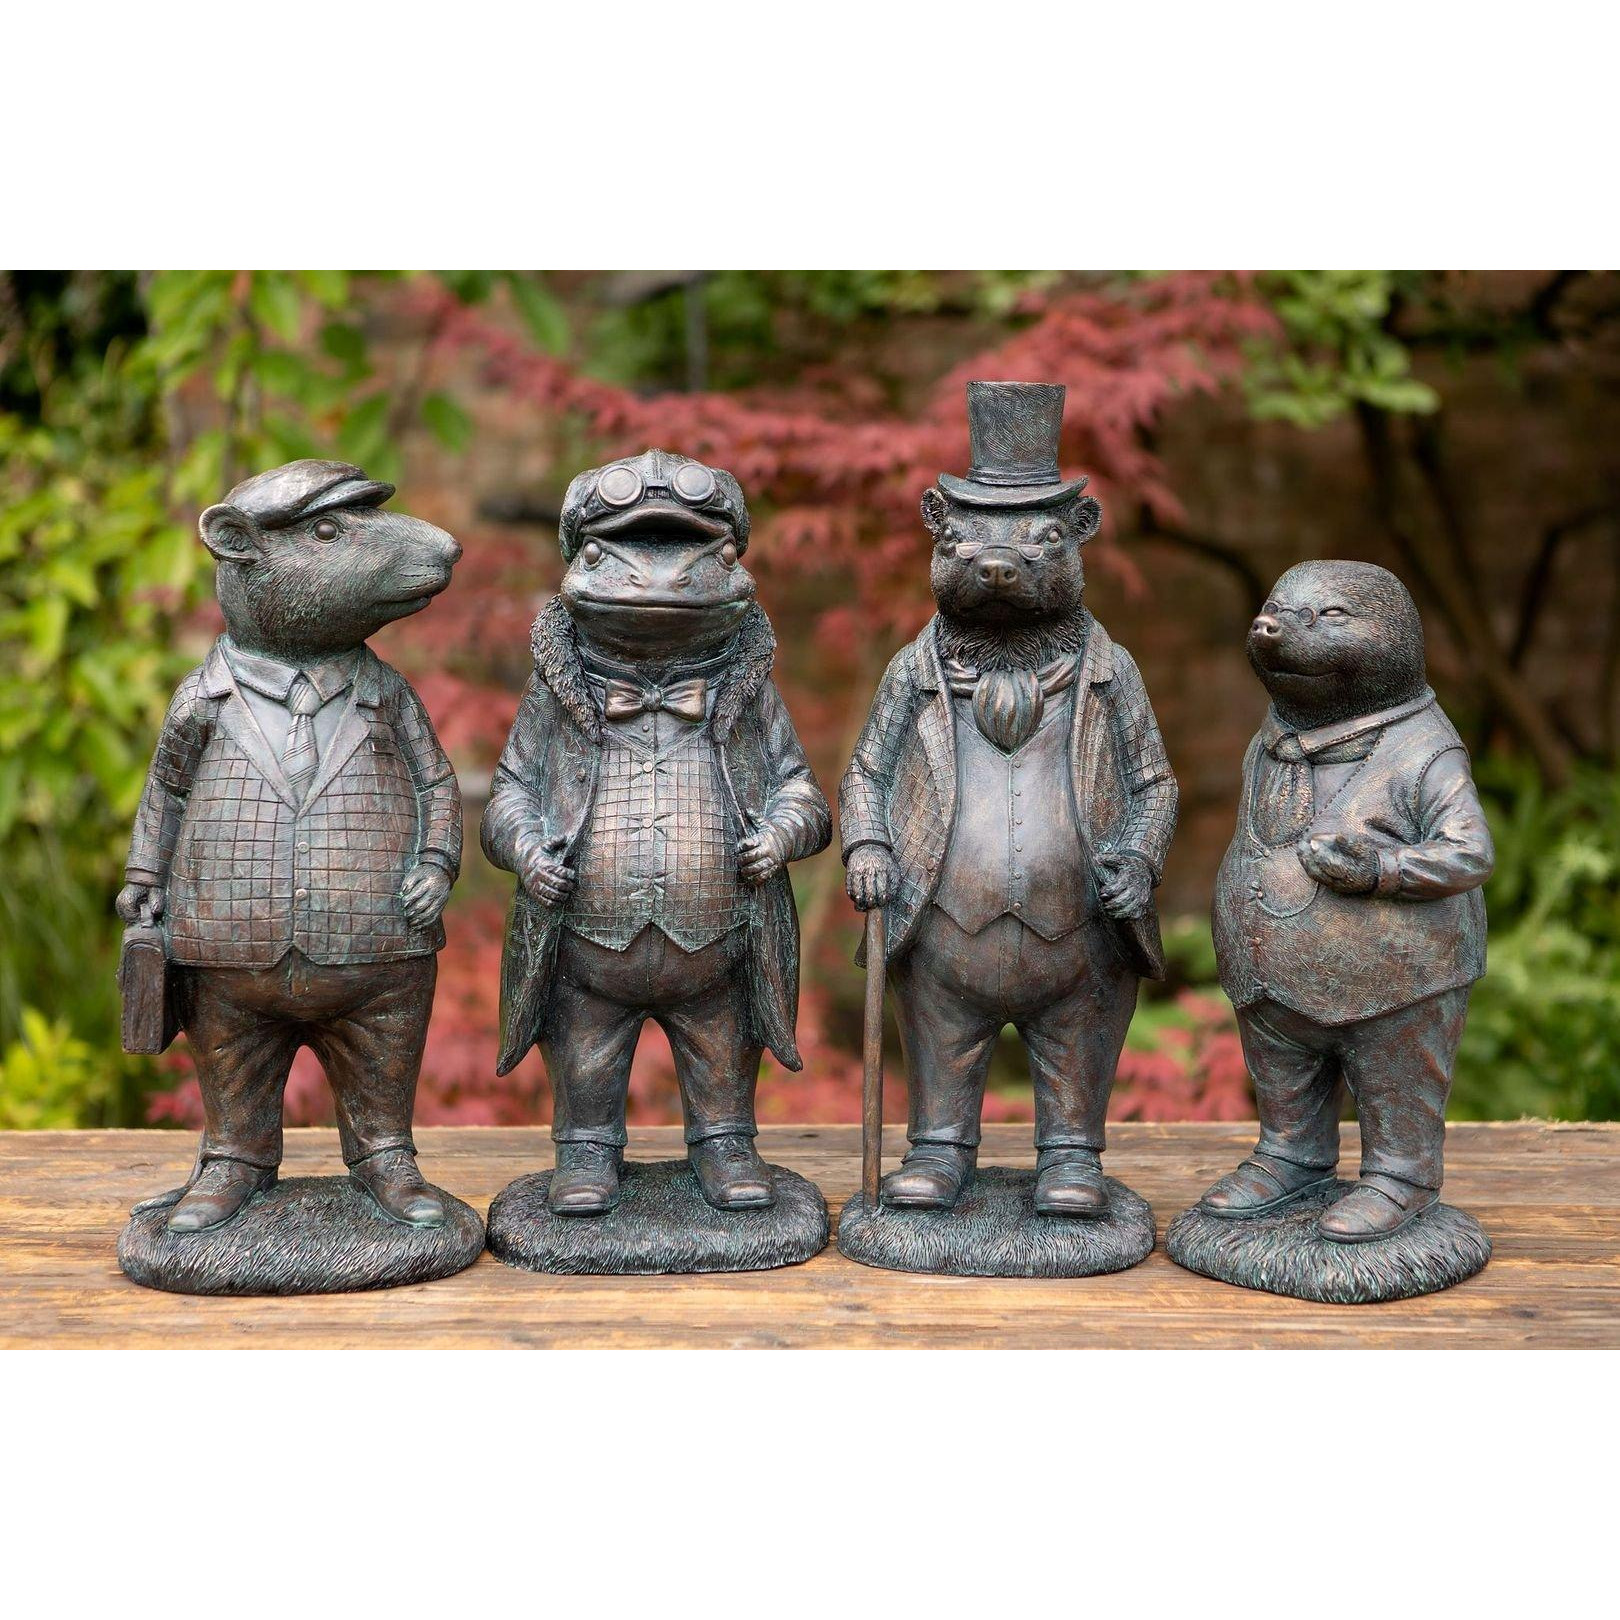 Wind in the Willows Garden Ornaments Sculptures - image 1